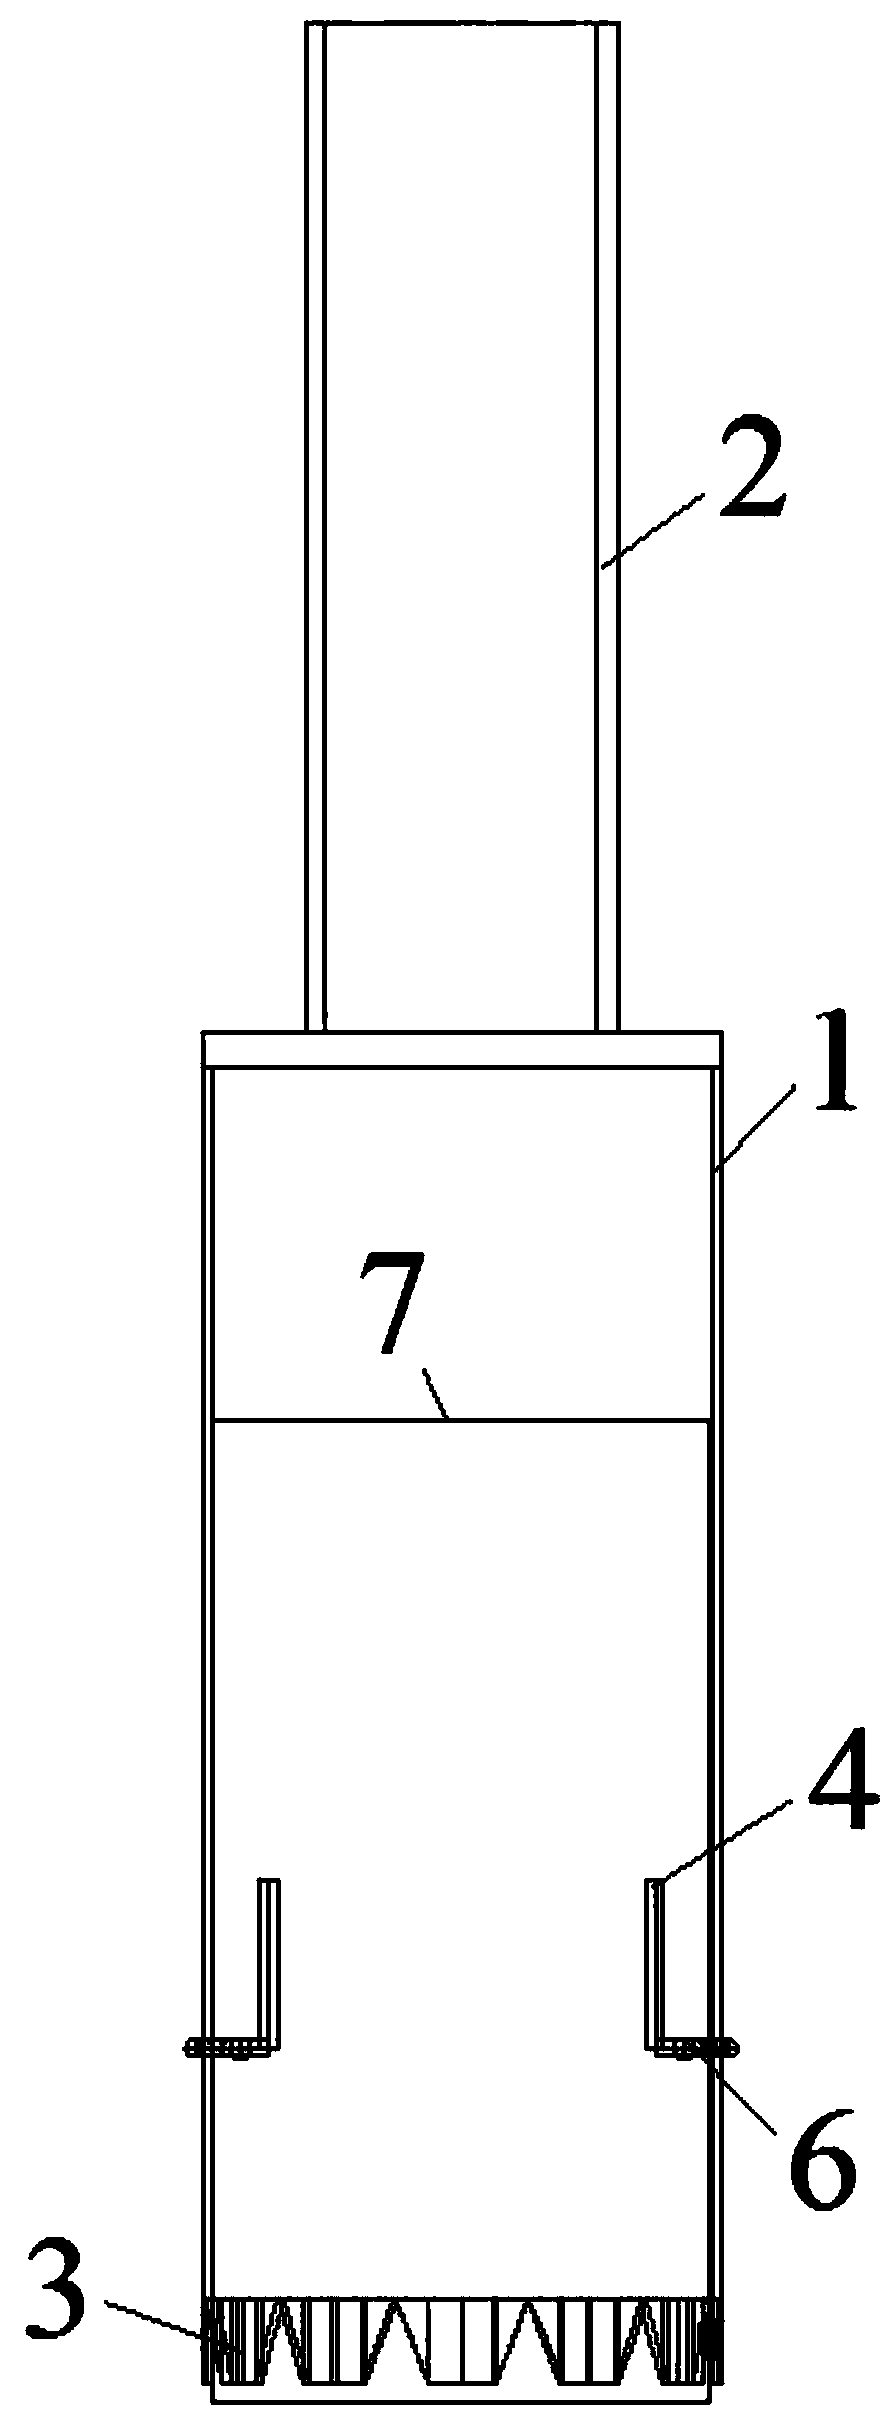 Simple ultra-large-diameter coring drill core sample extraction device and coring method